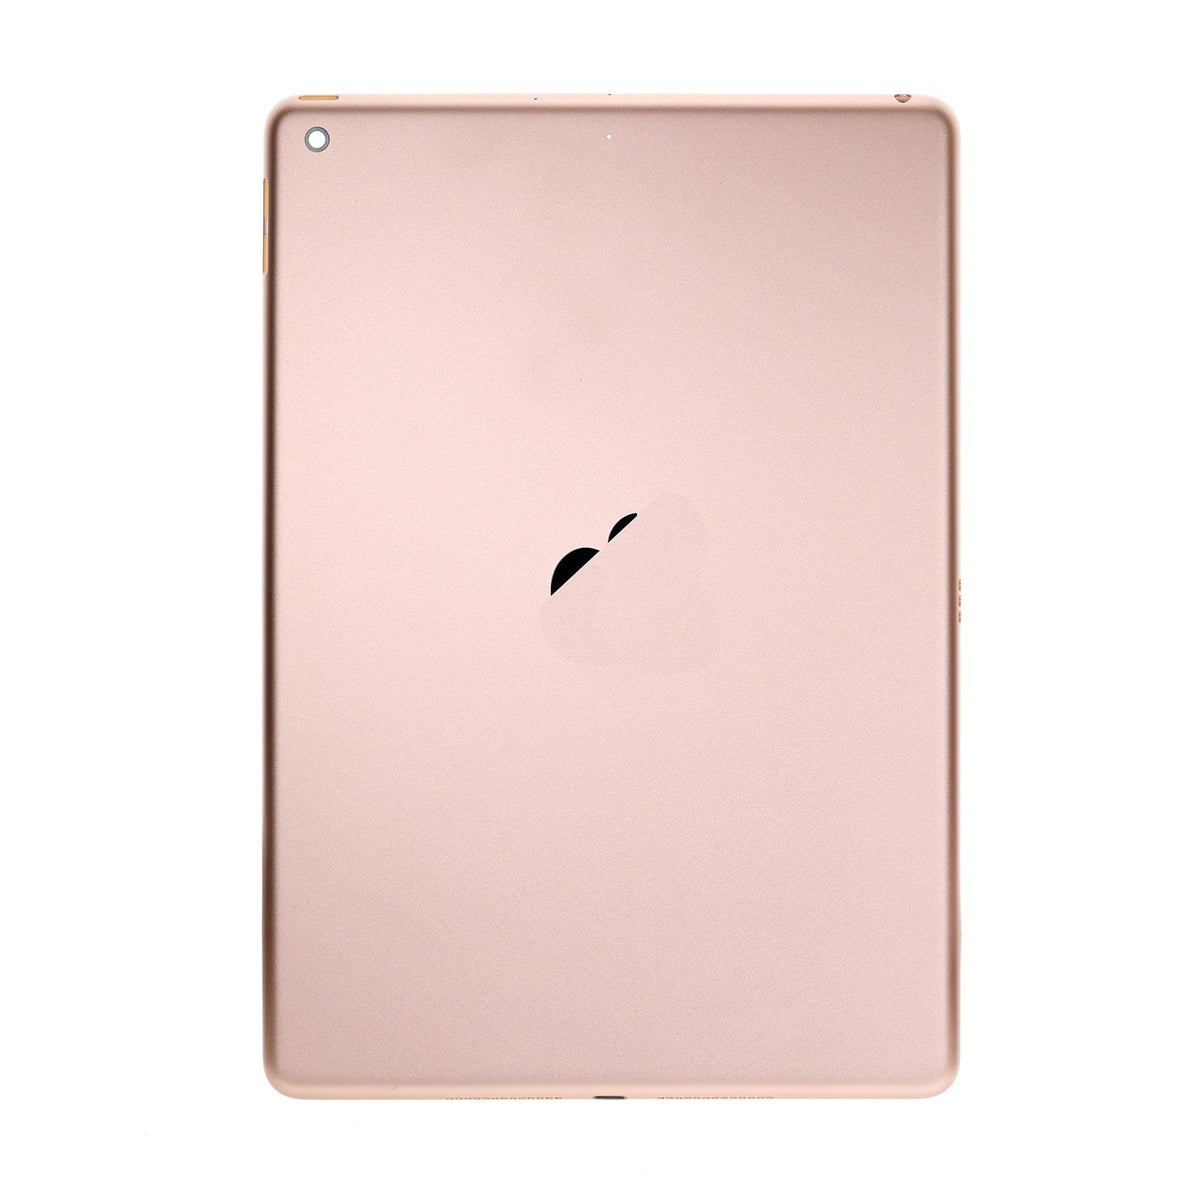 ROSE GOLD BACK COVER (WIFI VERSION) FOR IPAD 7TH/8TH